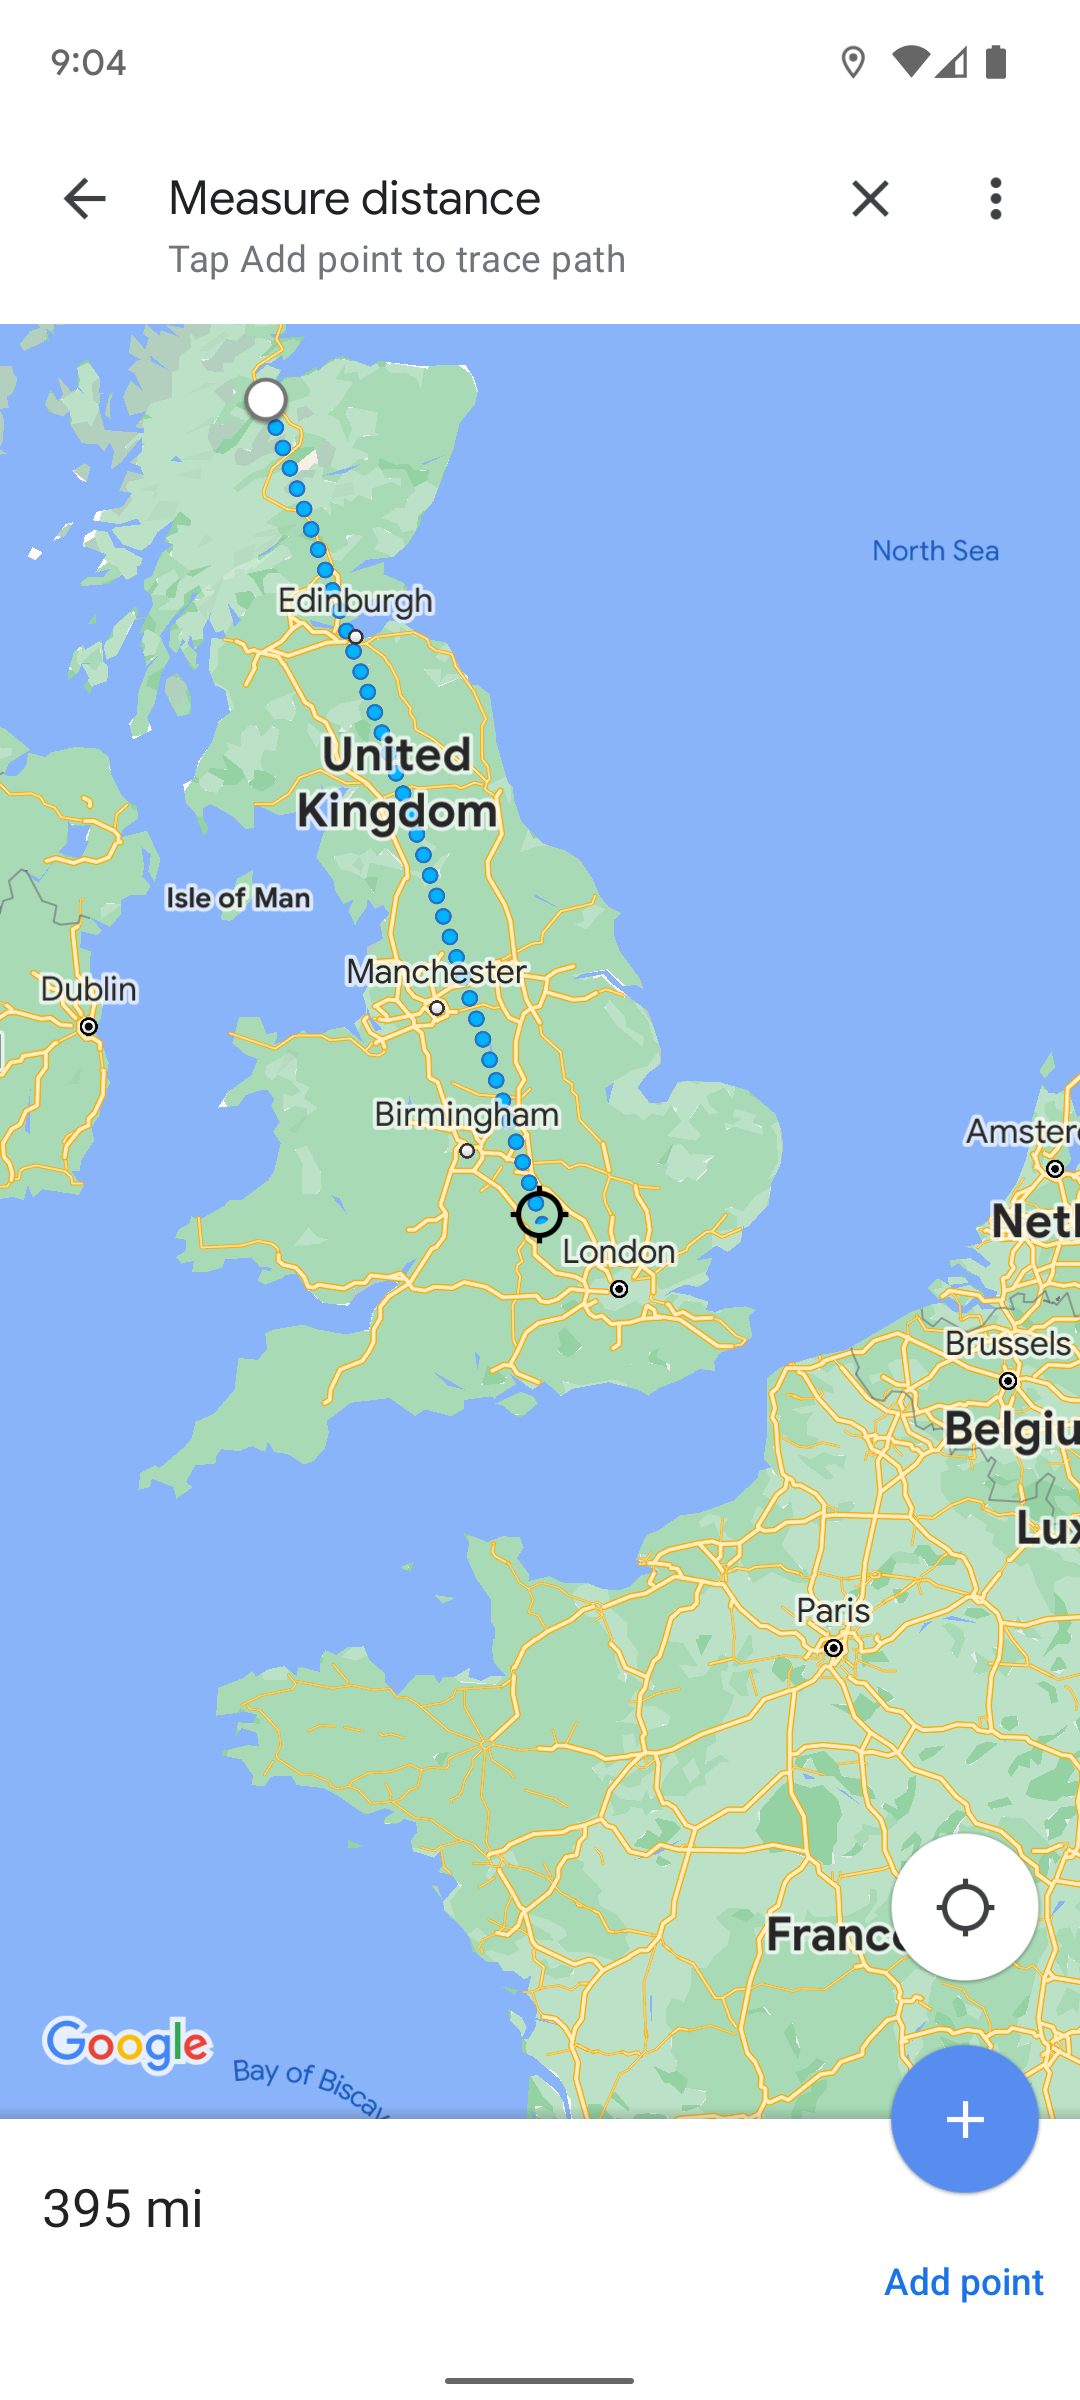 Screenshot shows the 'Measure distance' tool being used in Google Maps. There are two points on the map with a line between them and '395 mi' displayed in the lower left.